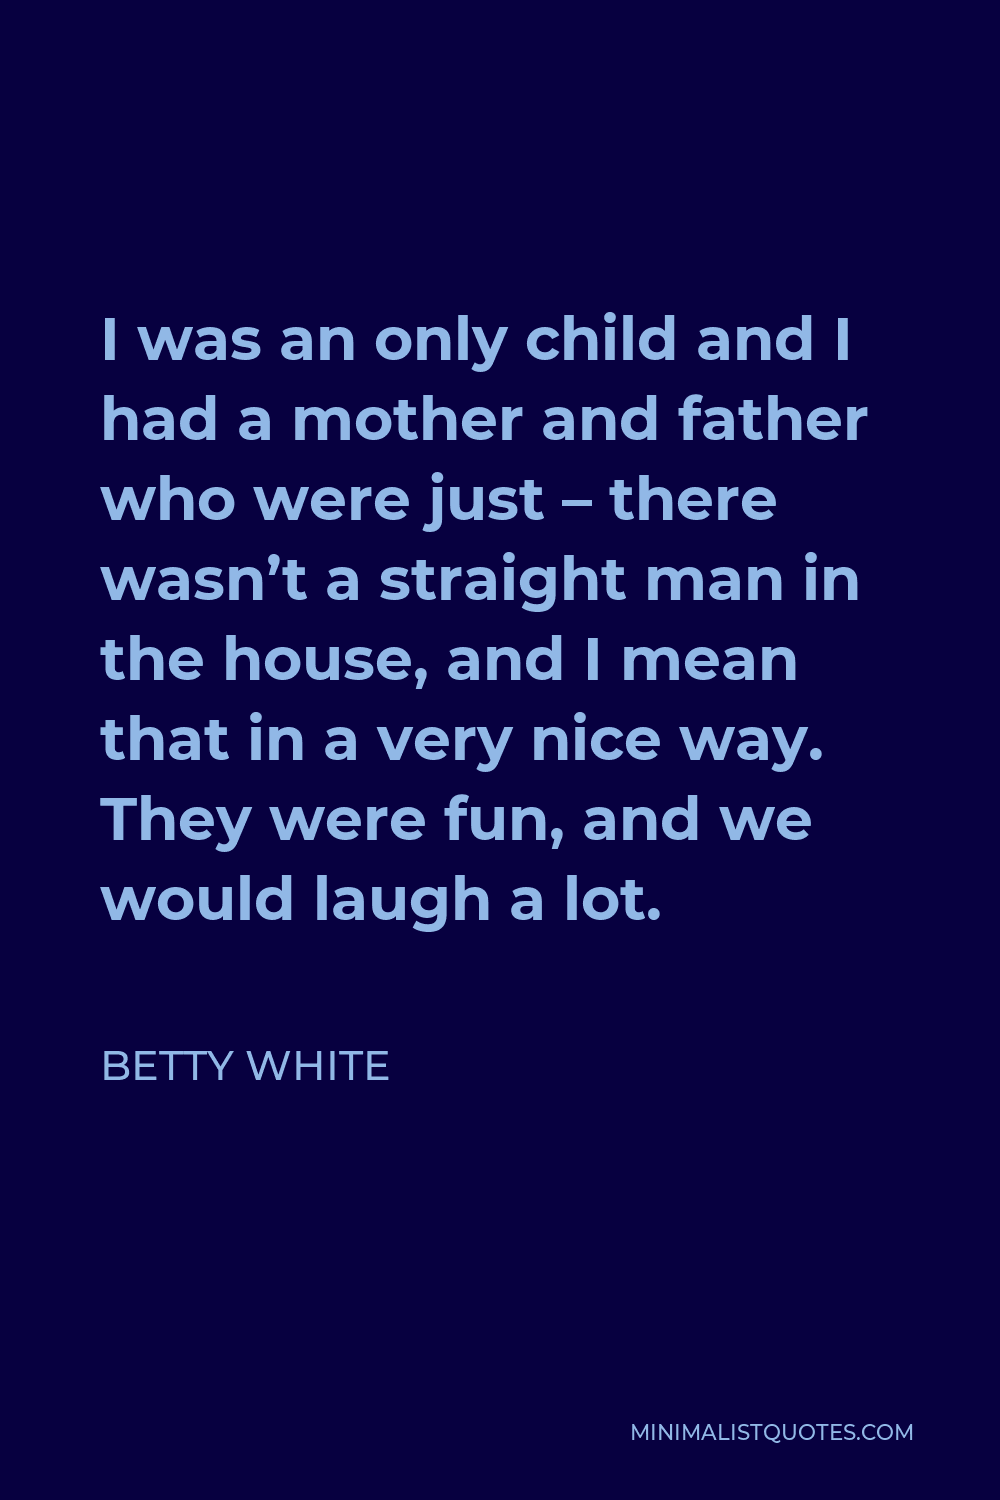 Betty White Quote - I was an only child and I had a mother and father who were just – there wasn’t a straight man in the house, and I mean that in a very nice way. They were fun, and we would laugh a lot.